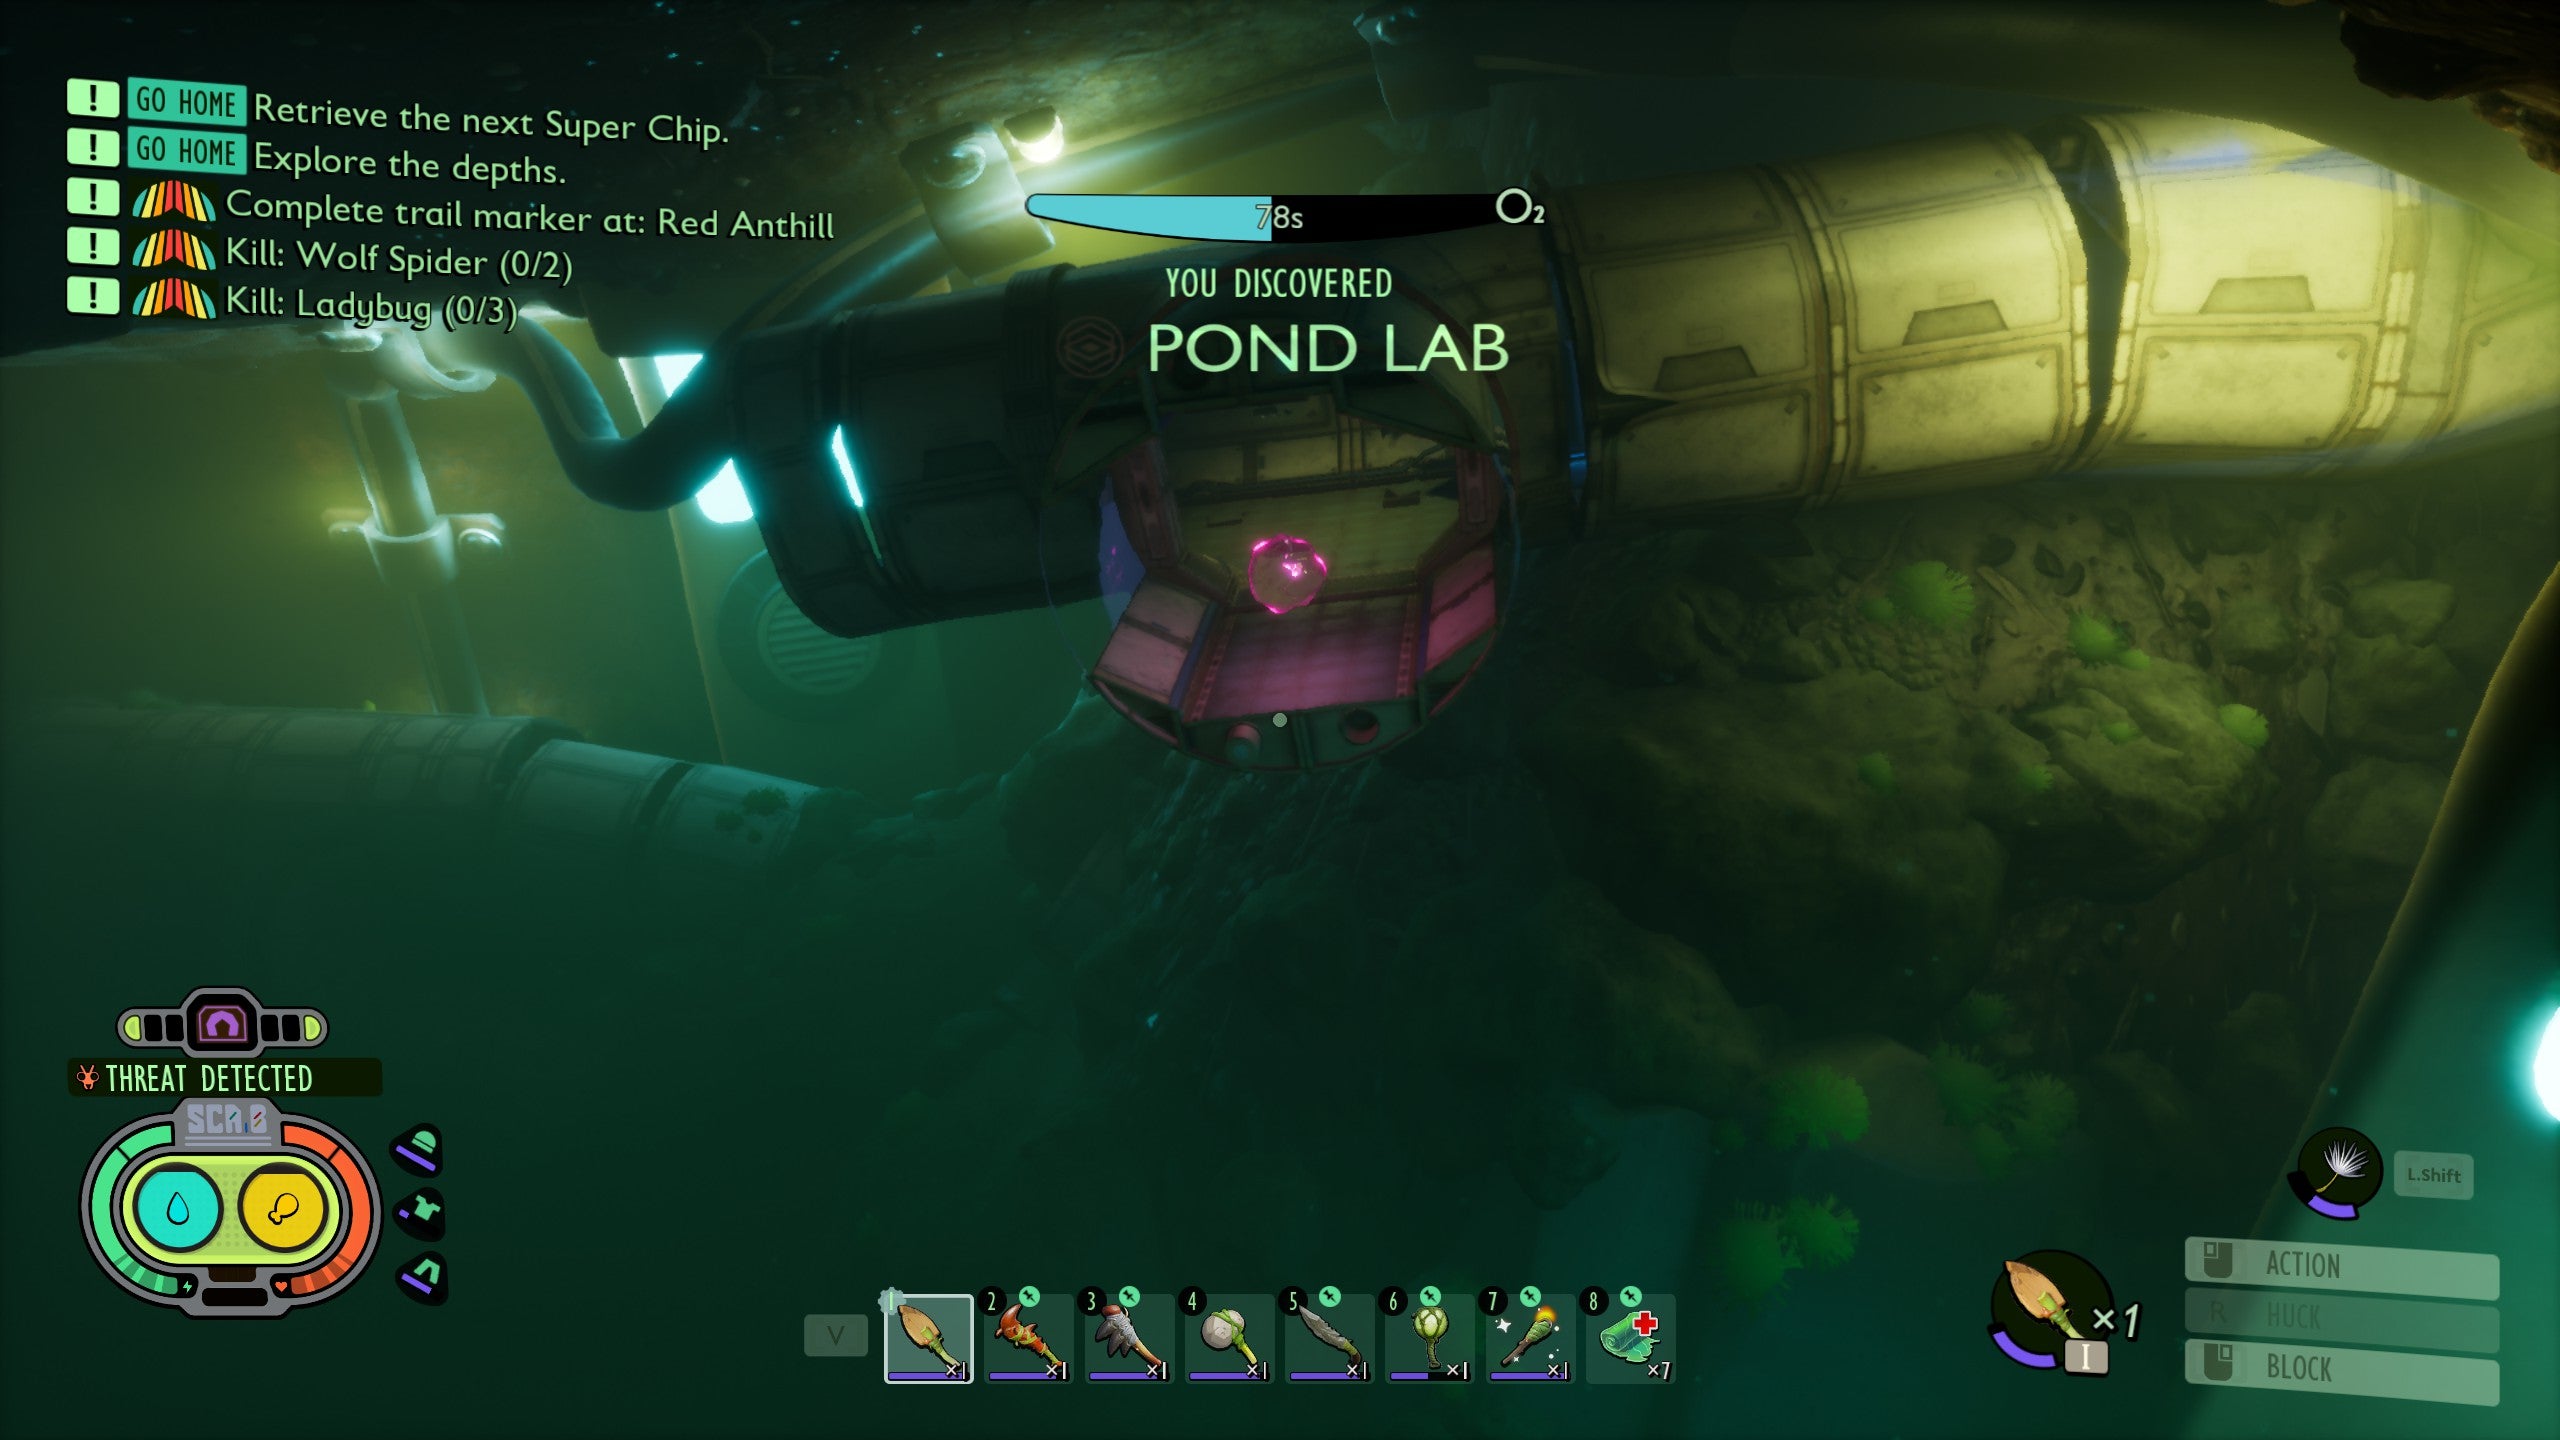 The entrance to the Pond Lab in Grounded